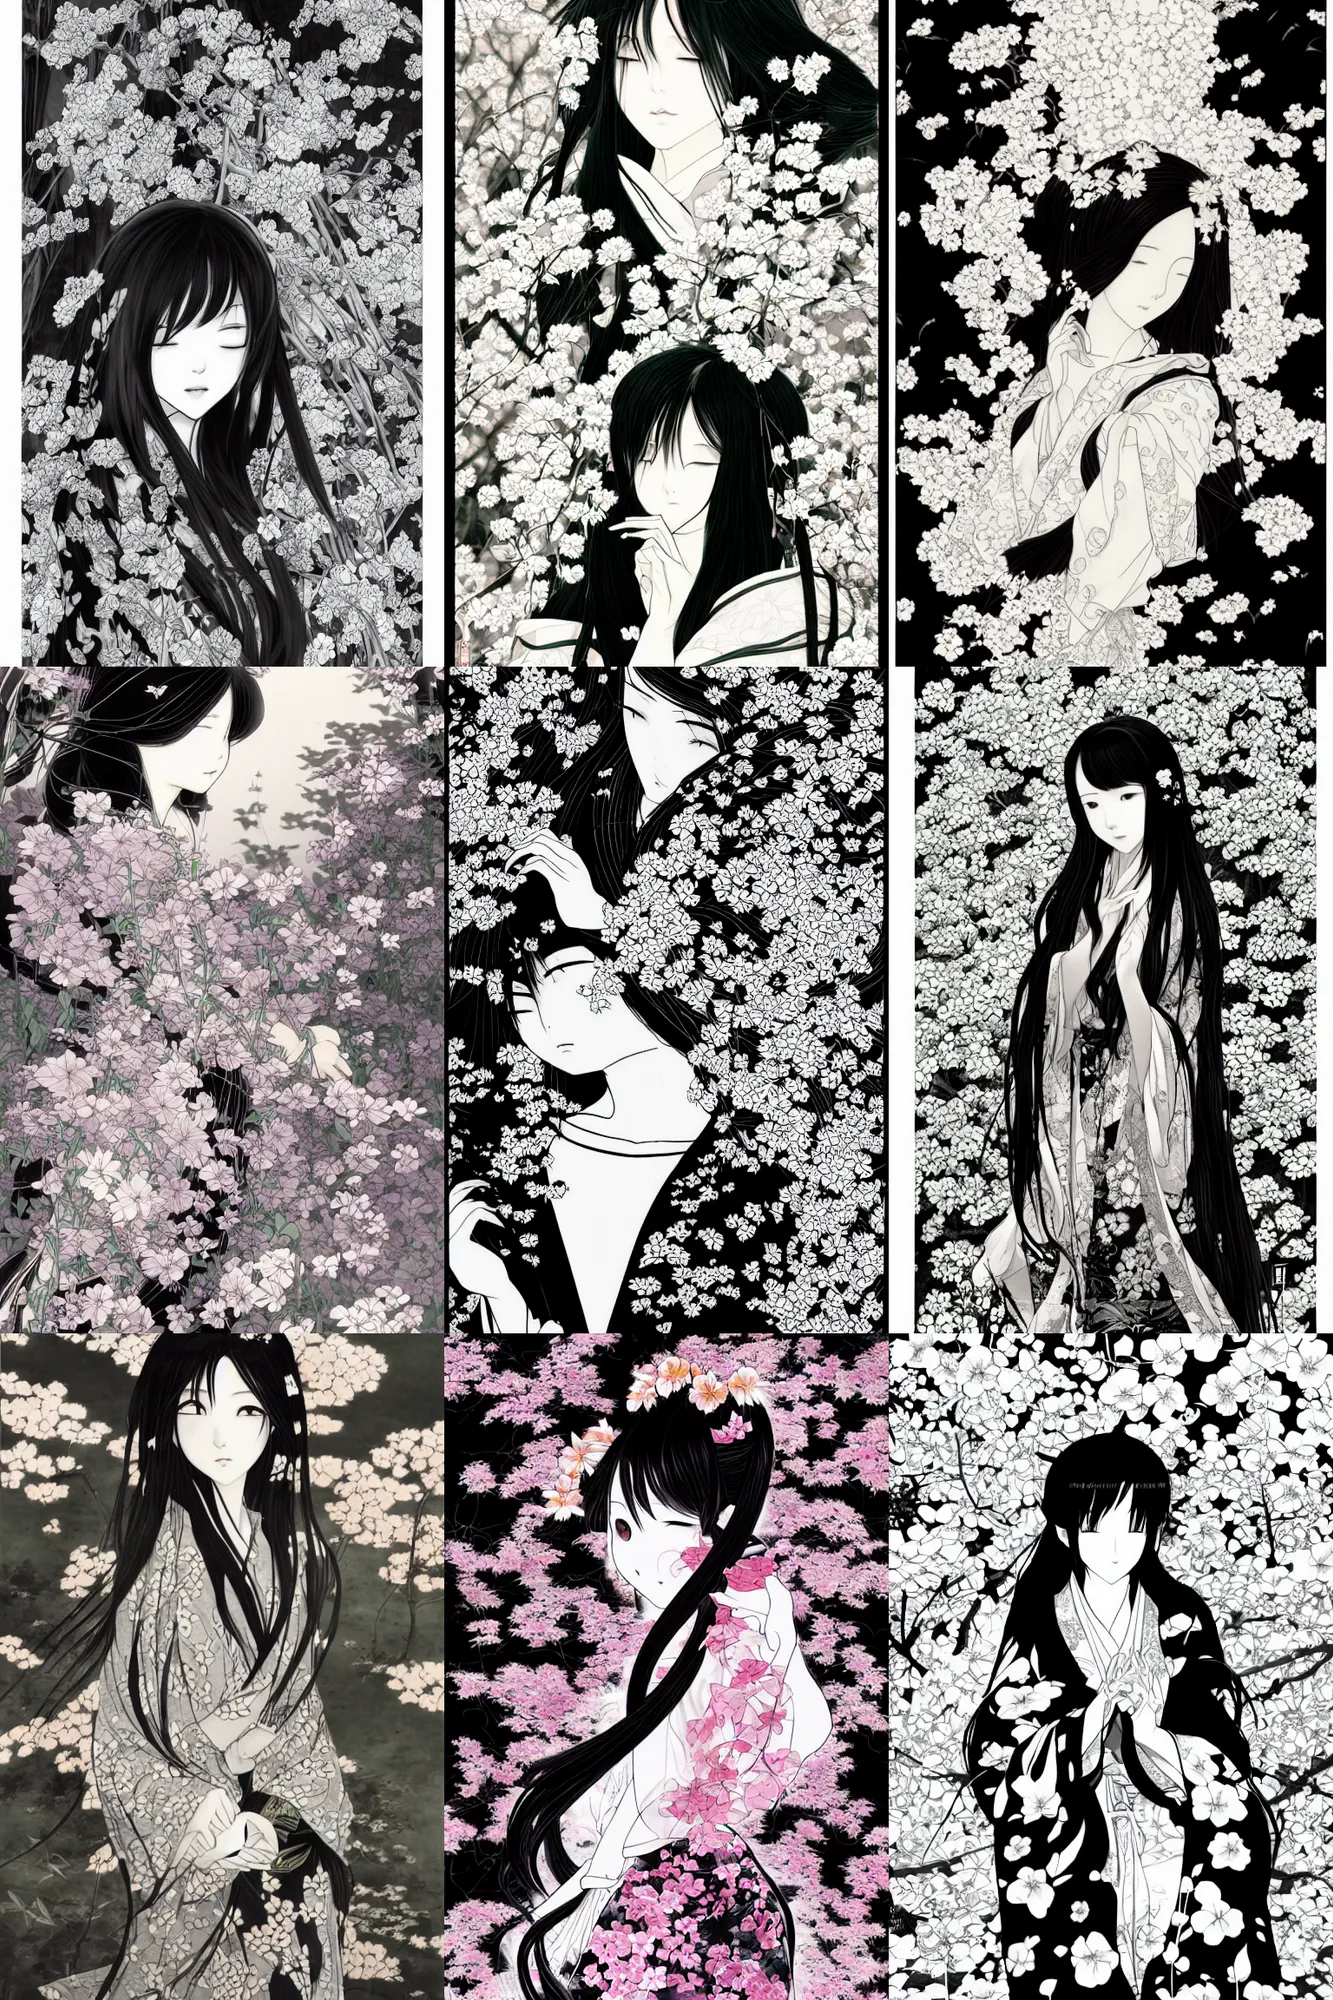 Prompt: a vertical portrait of a character in a scenic environment by Yoshitaka Amano, flower background, kimono, black and white, dreamy, wavy long black hair, highly detailed